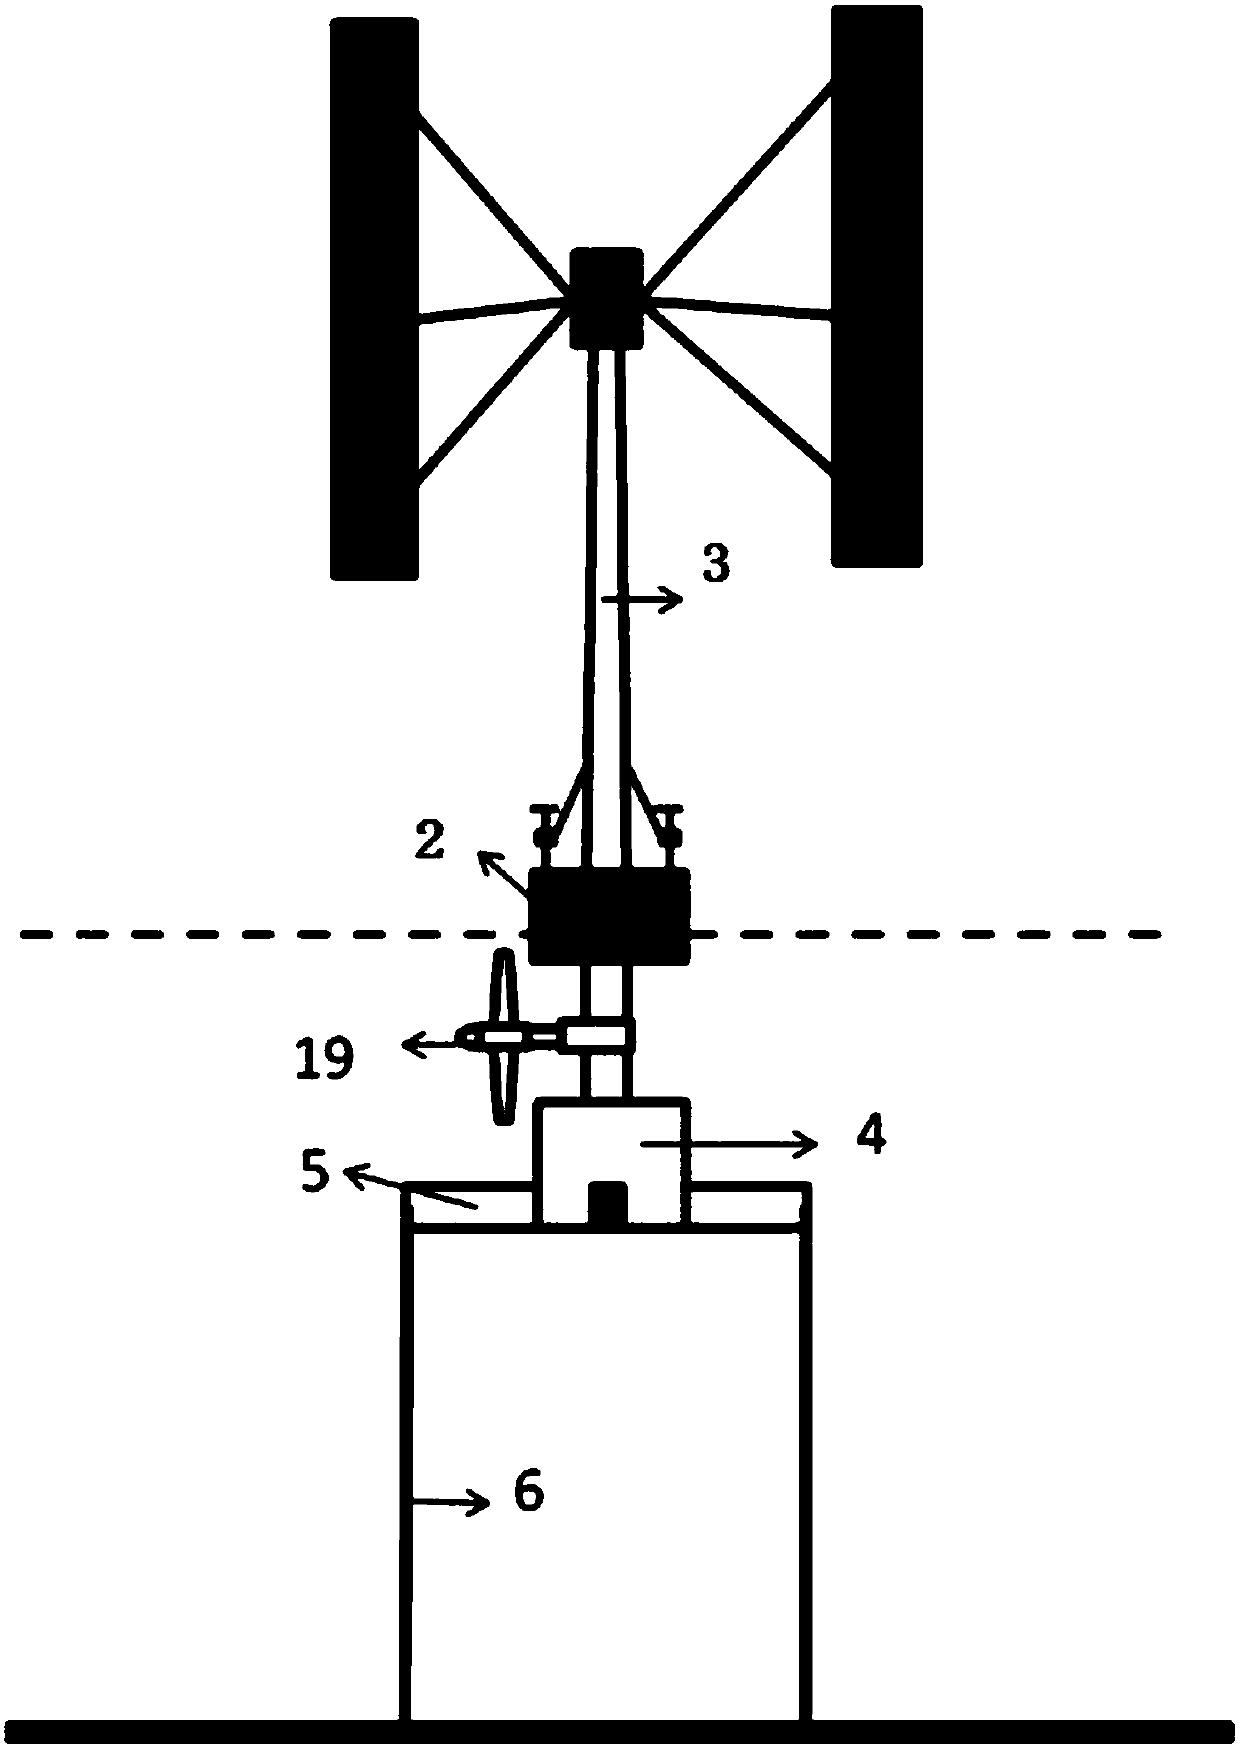 Vertical axis wind turbine-bi-directional wave energy device-tidal current energy device integrated structure based on tension leg platform